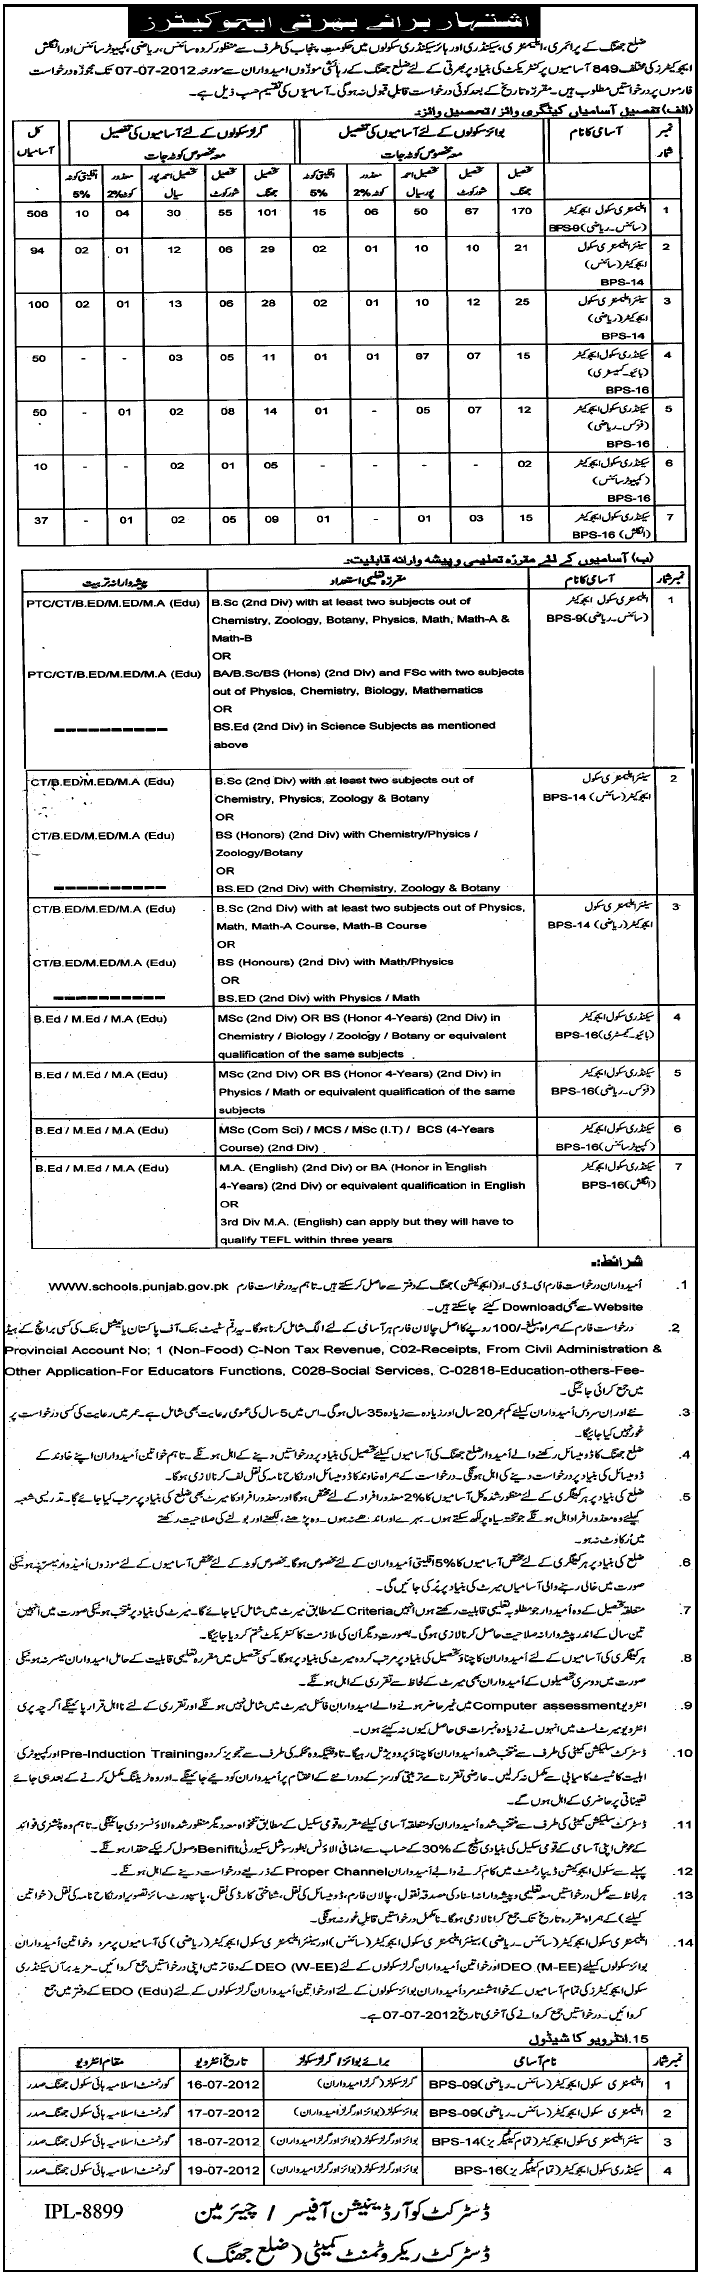 Teachers/Educators Required by Government of Punjab at Primary, Elementary, Secondary and Higher Secondary Schools (Jhang District) (849 Vacancies) (Govt. Job)